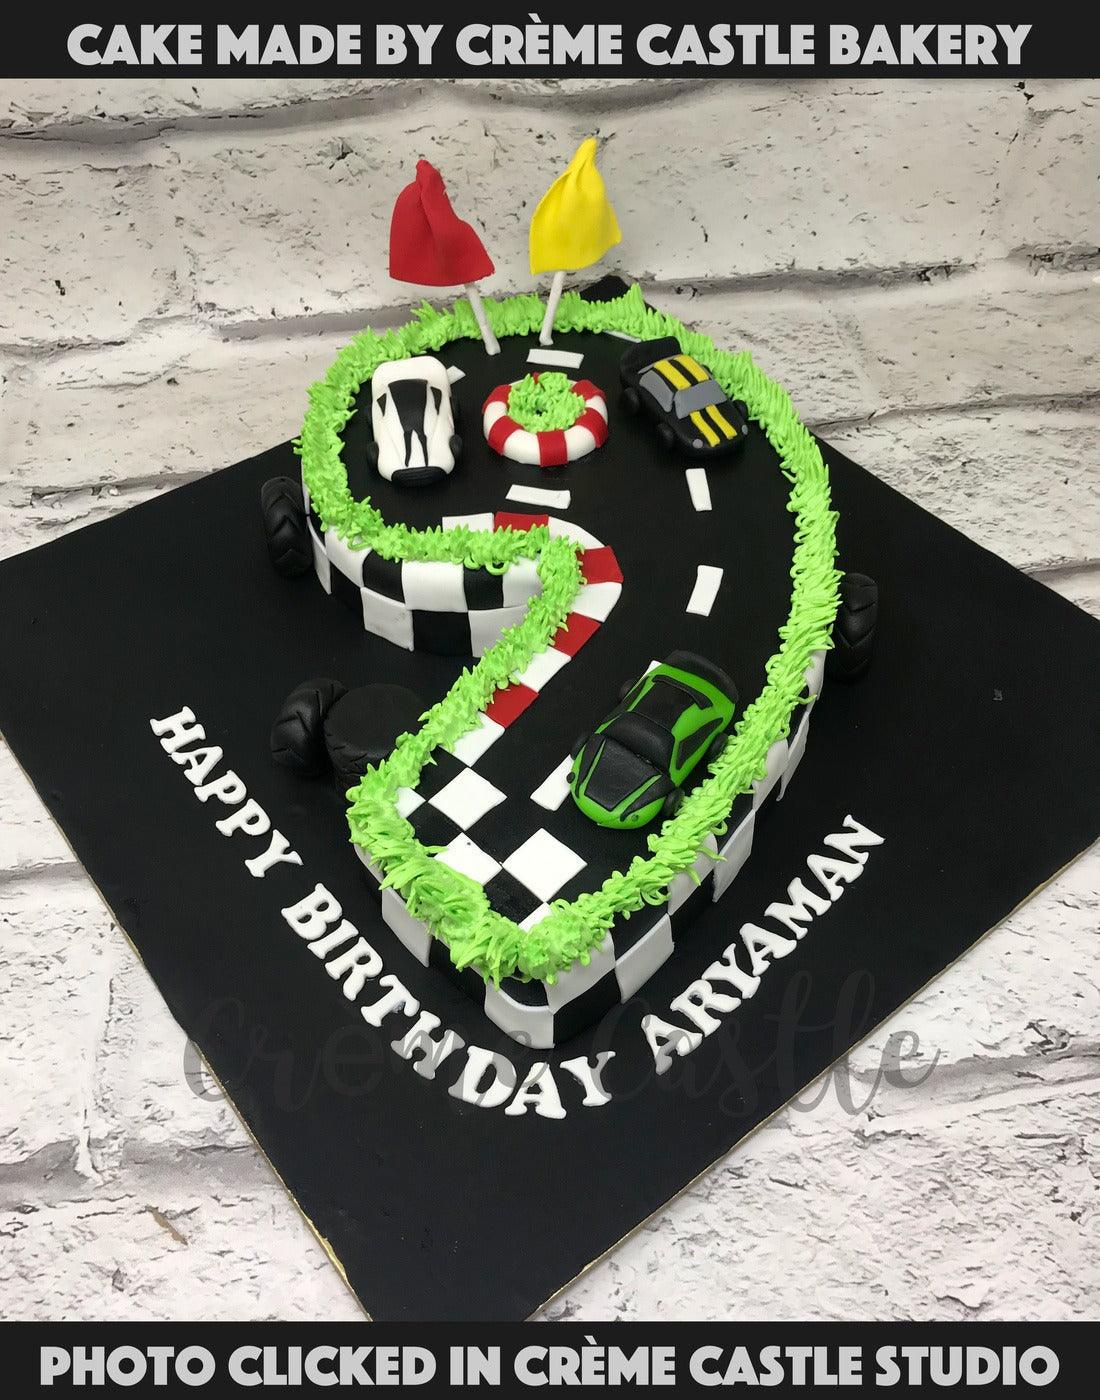 Rev Up the Fun with a Race Track Cake